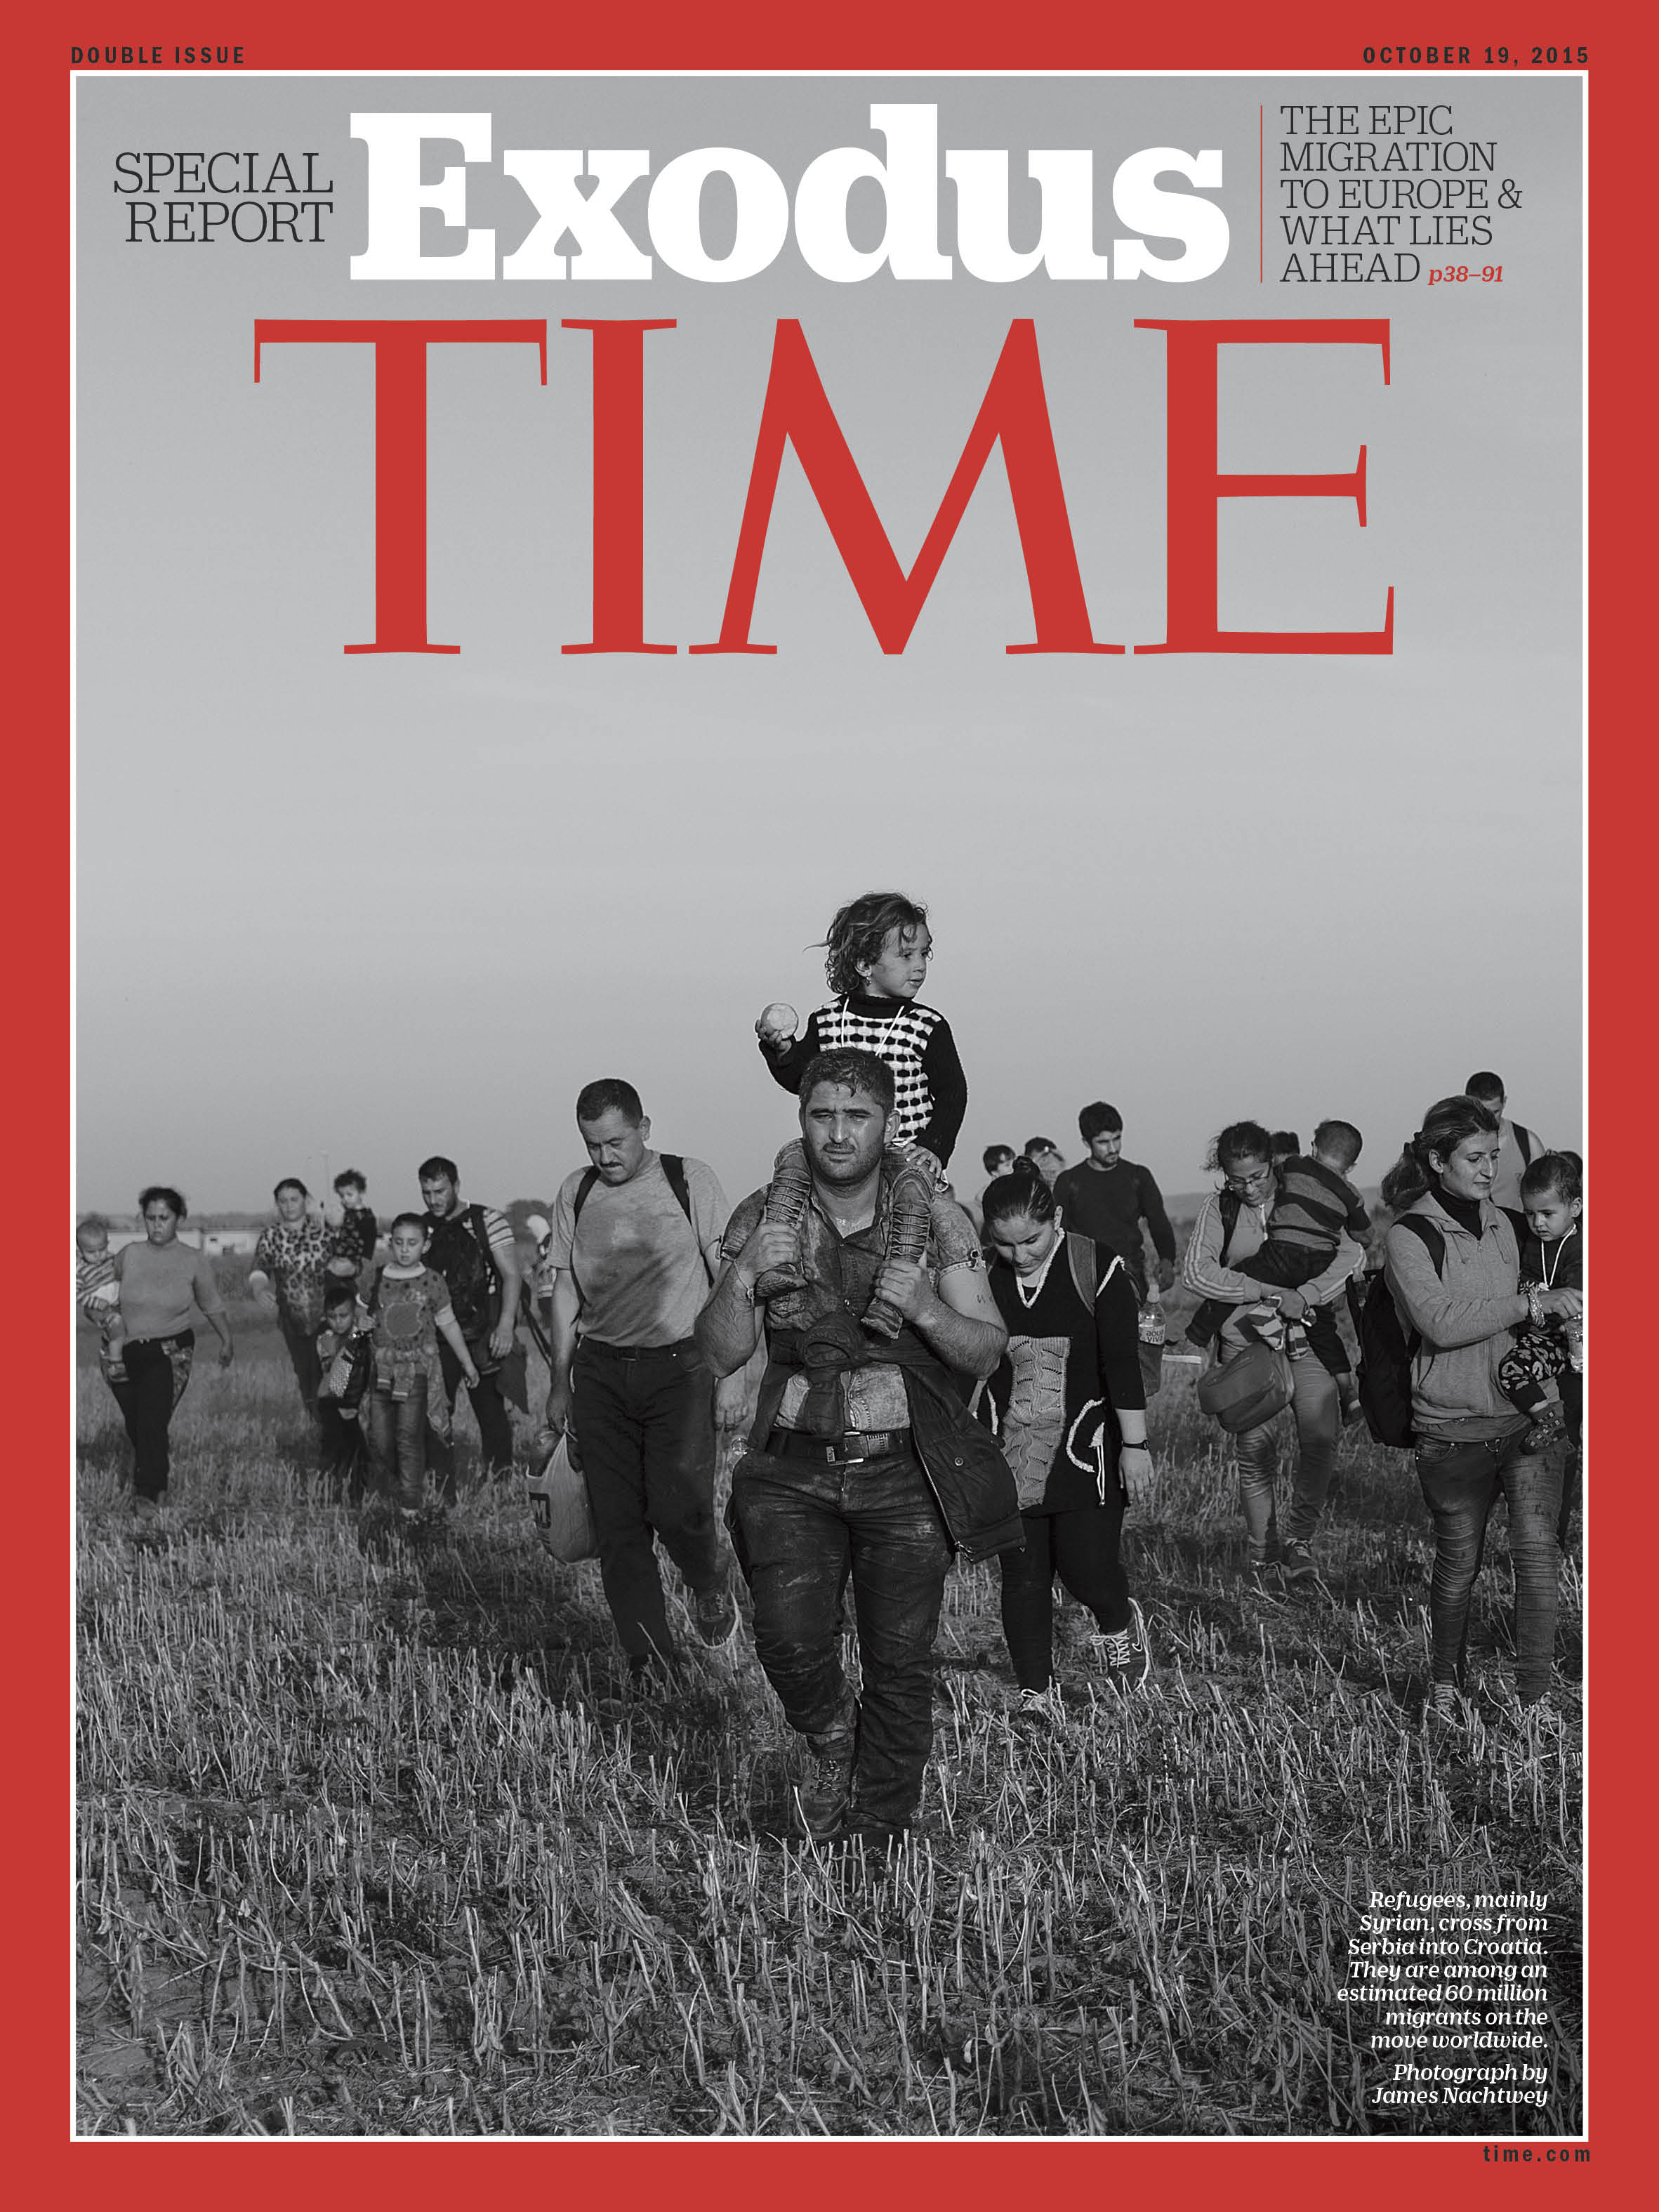 Refugees, mainly Syrian, cross from Serbia into Croatia. They are among an estimated 60 million migrants on the move worldwide. (Photograph by James Nachtwey for TIME)